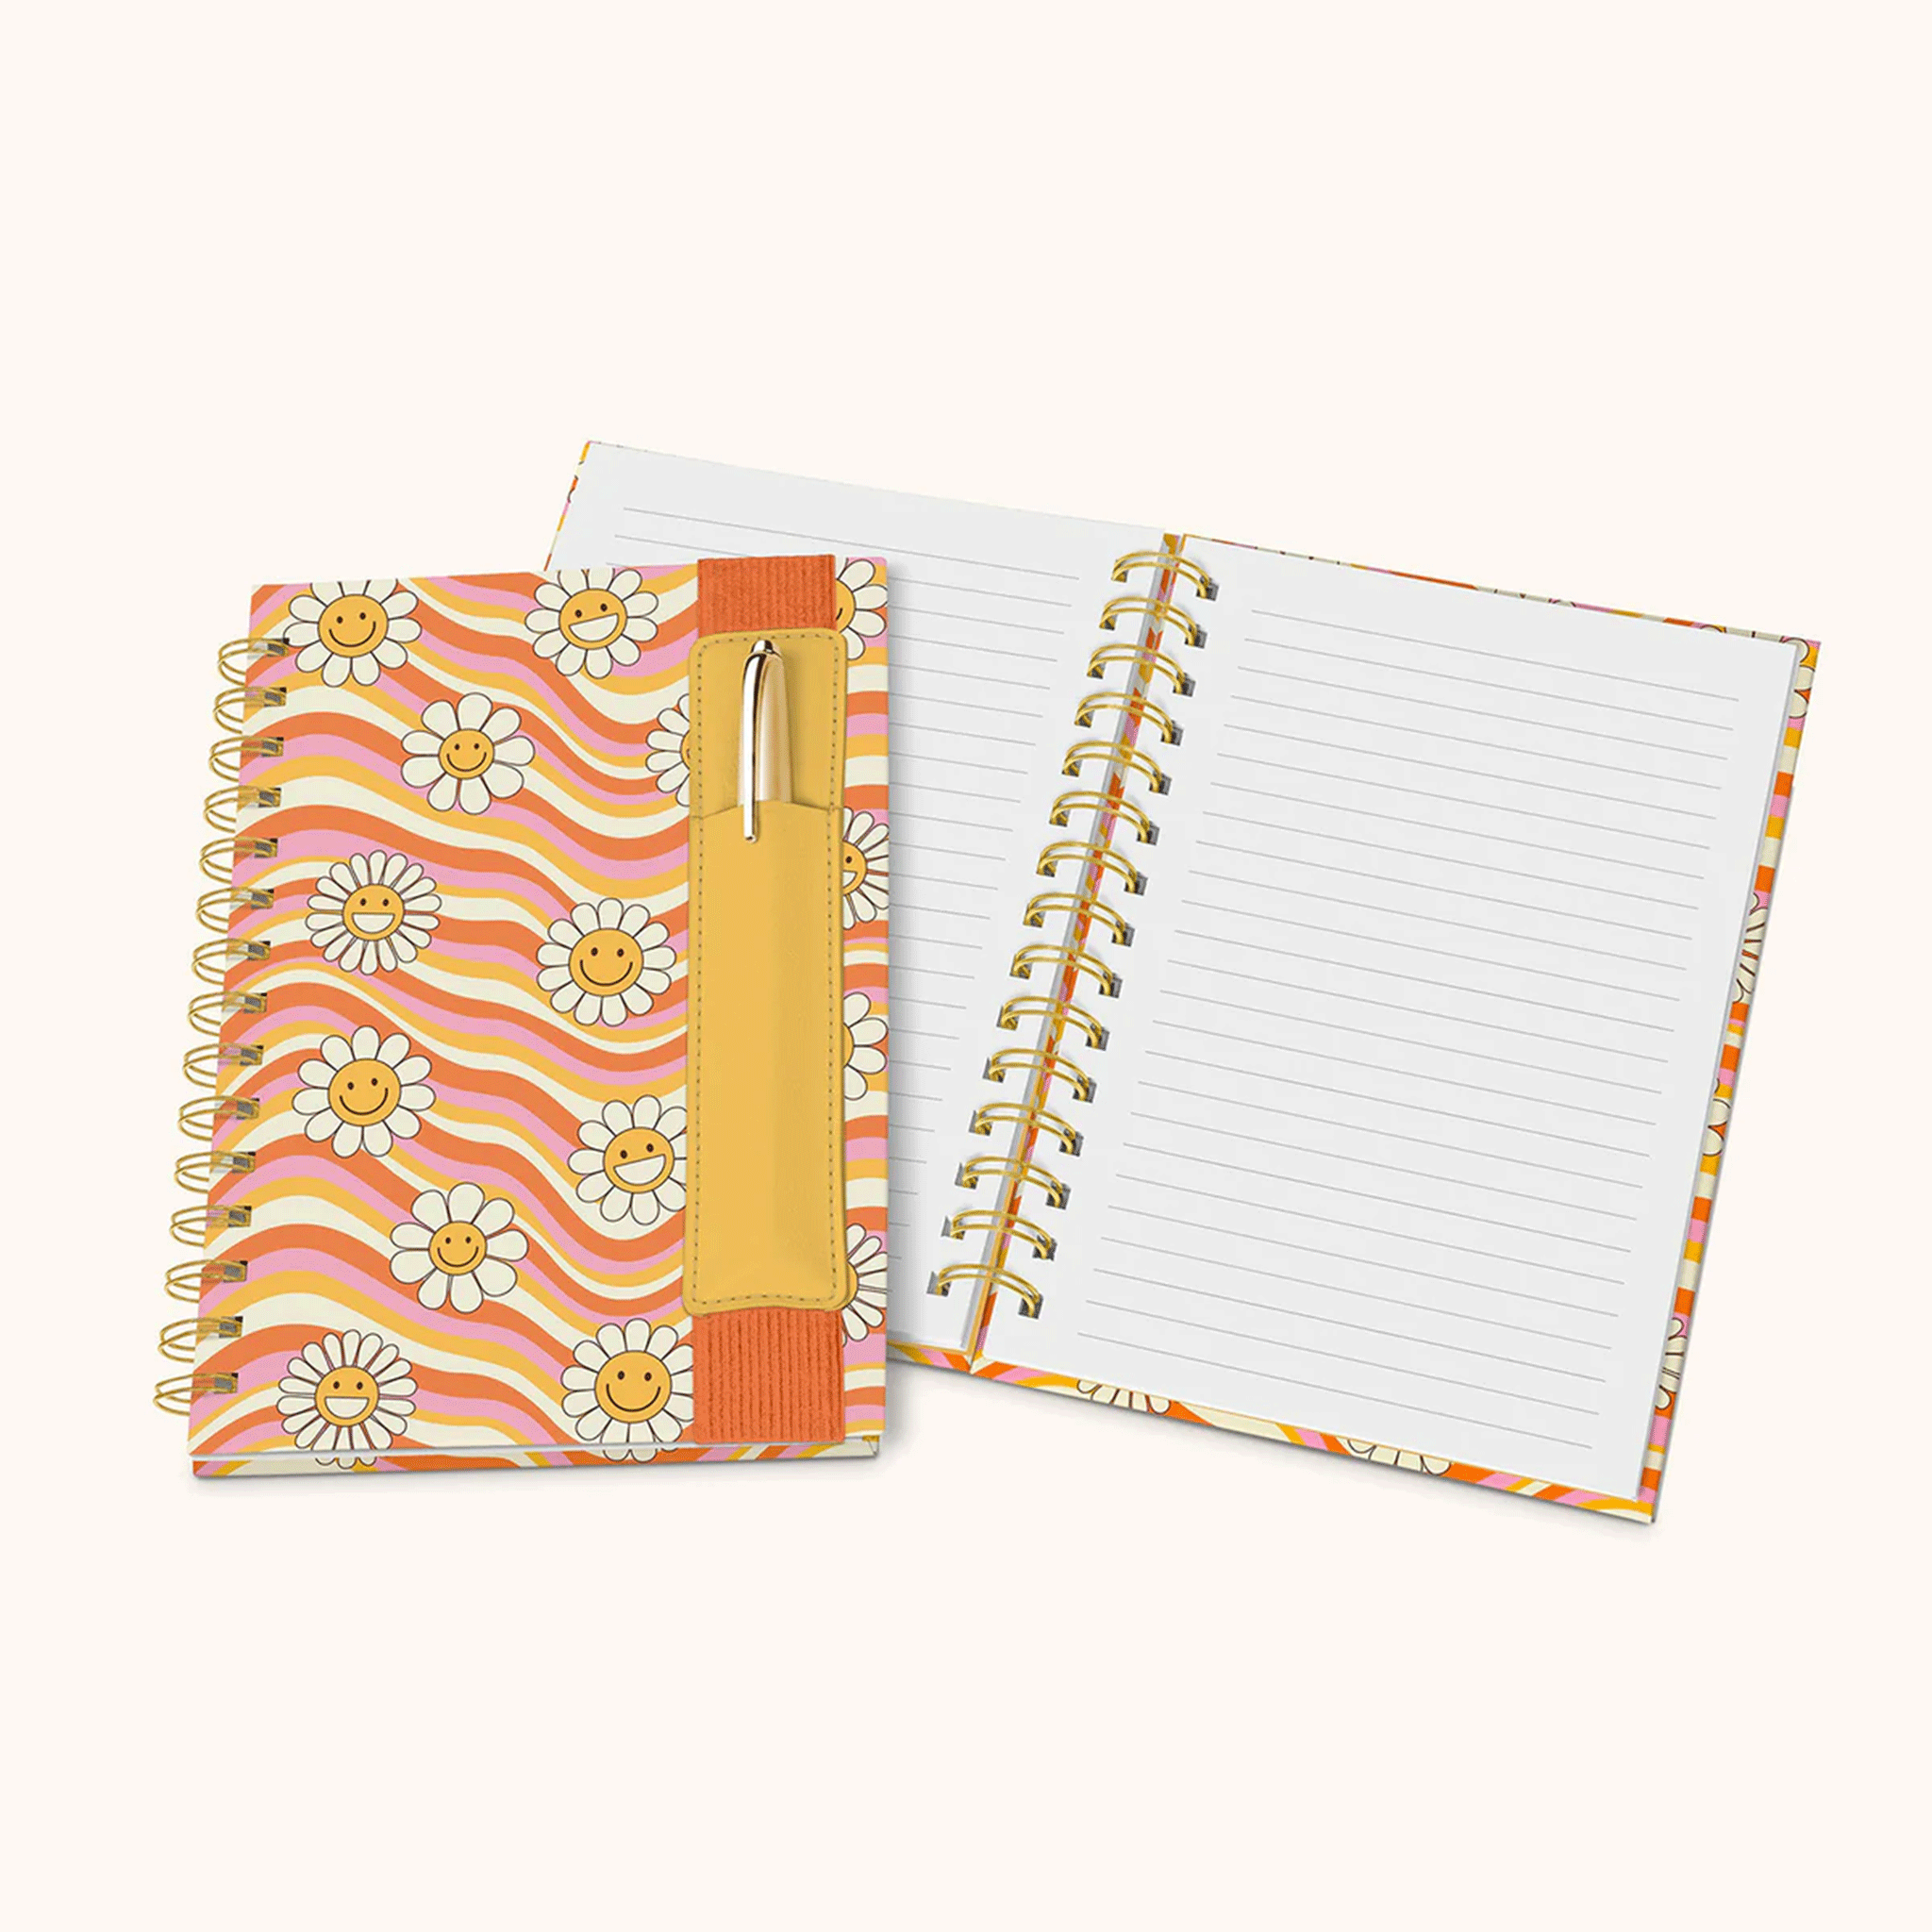 On a white background is an orange, yellow and pink wavy designed notebook with smiling daisies and a pen pocket.